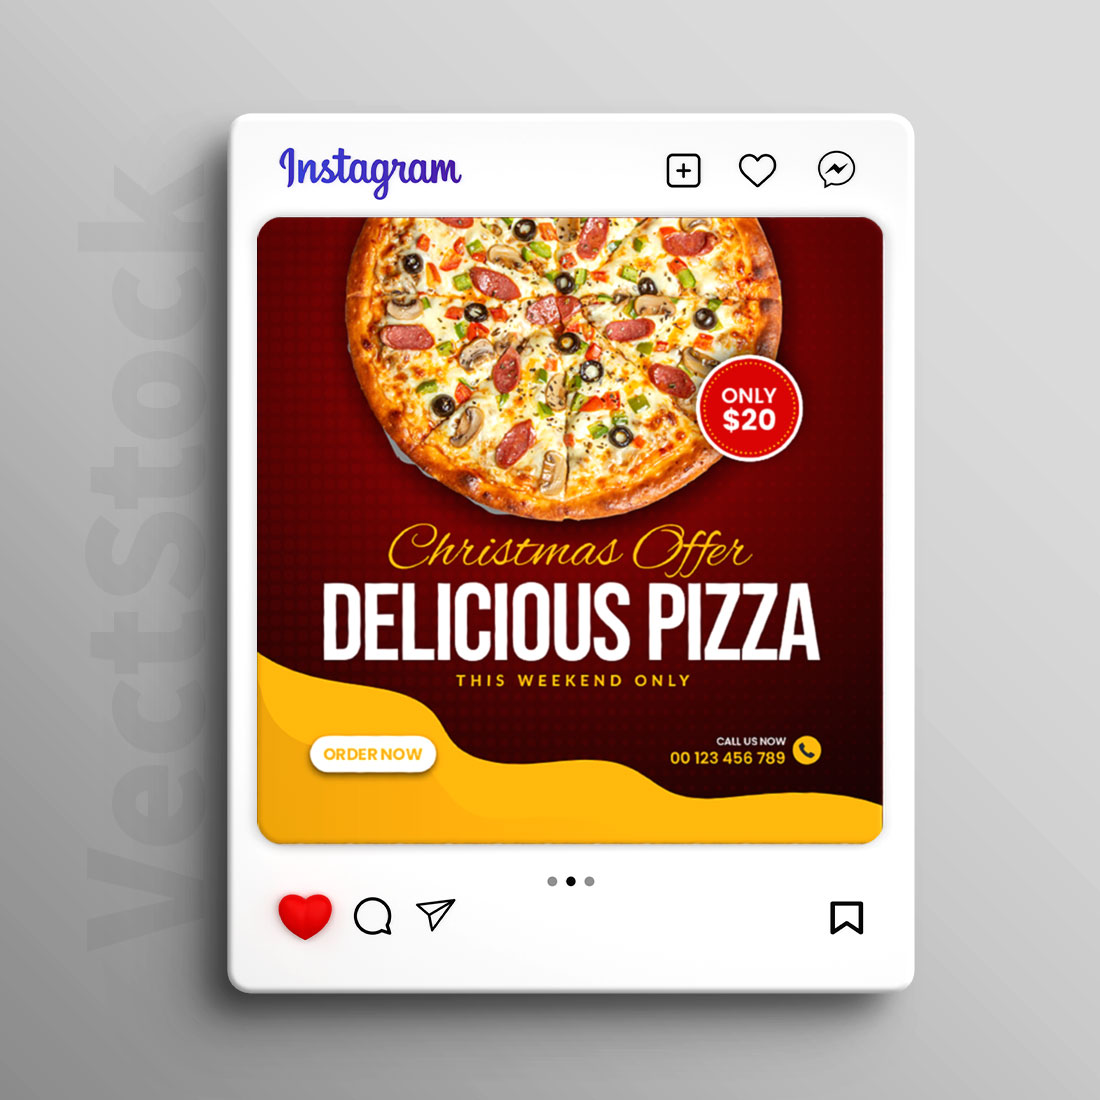 Delicious pizza sale social media Instagram post template preview image.